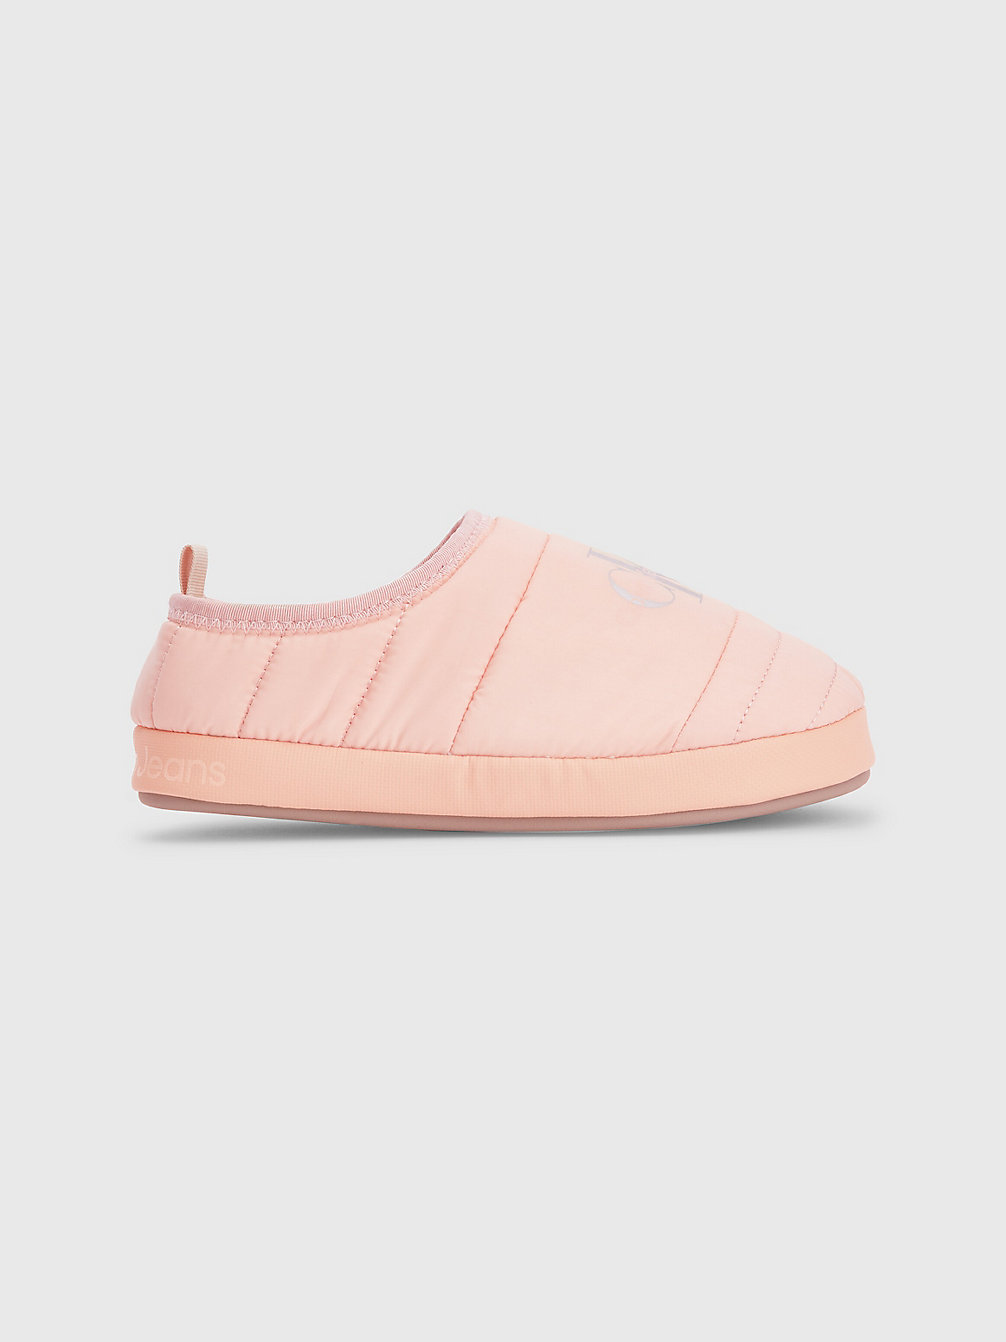 PINK BLUSH Recycled Quilted Slippers undefined women Calvin Klein